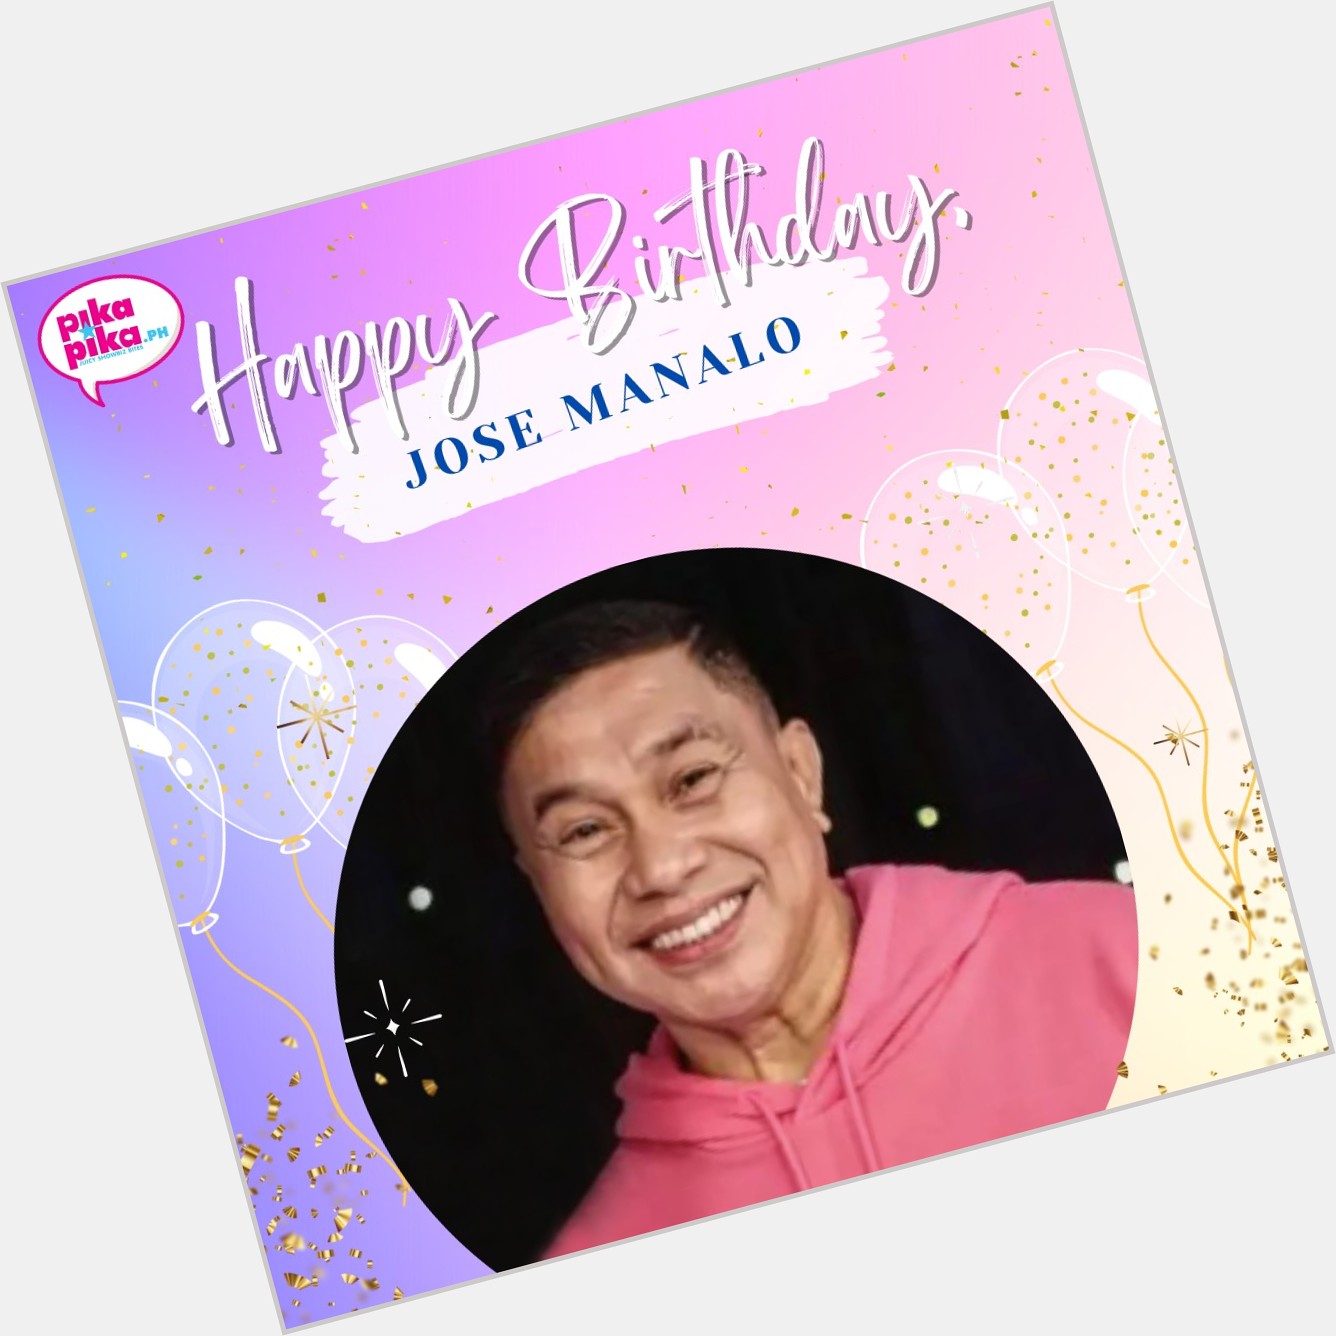 Happy birthday, Jose Manalo! May your special day be filled with love and cheers.    